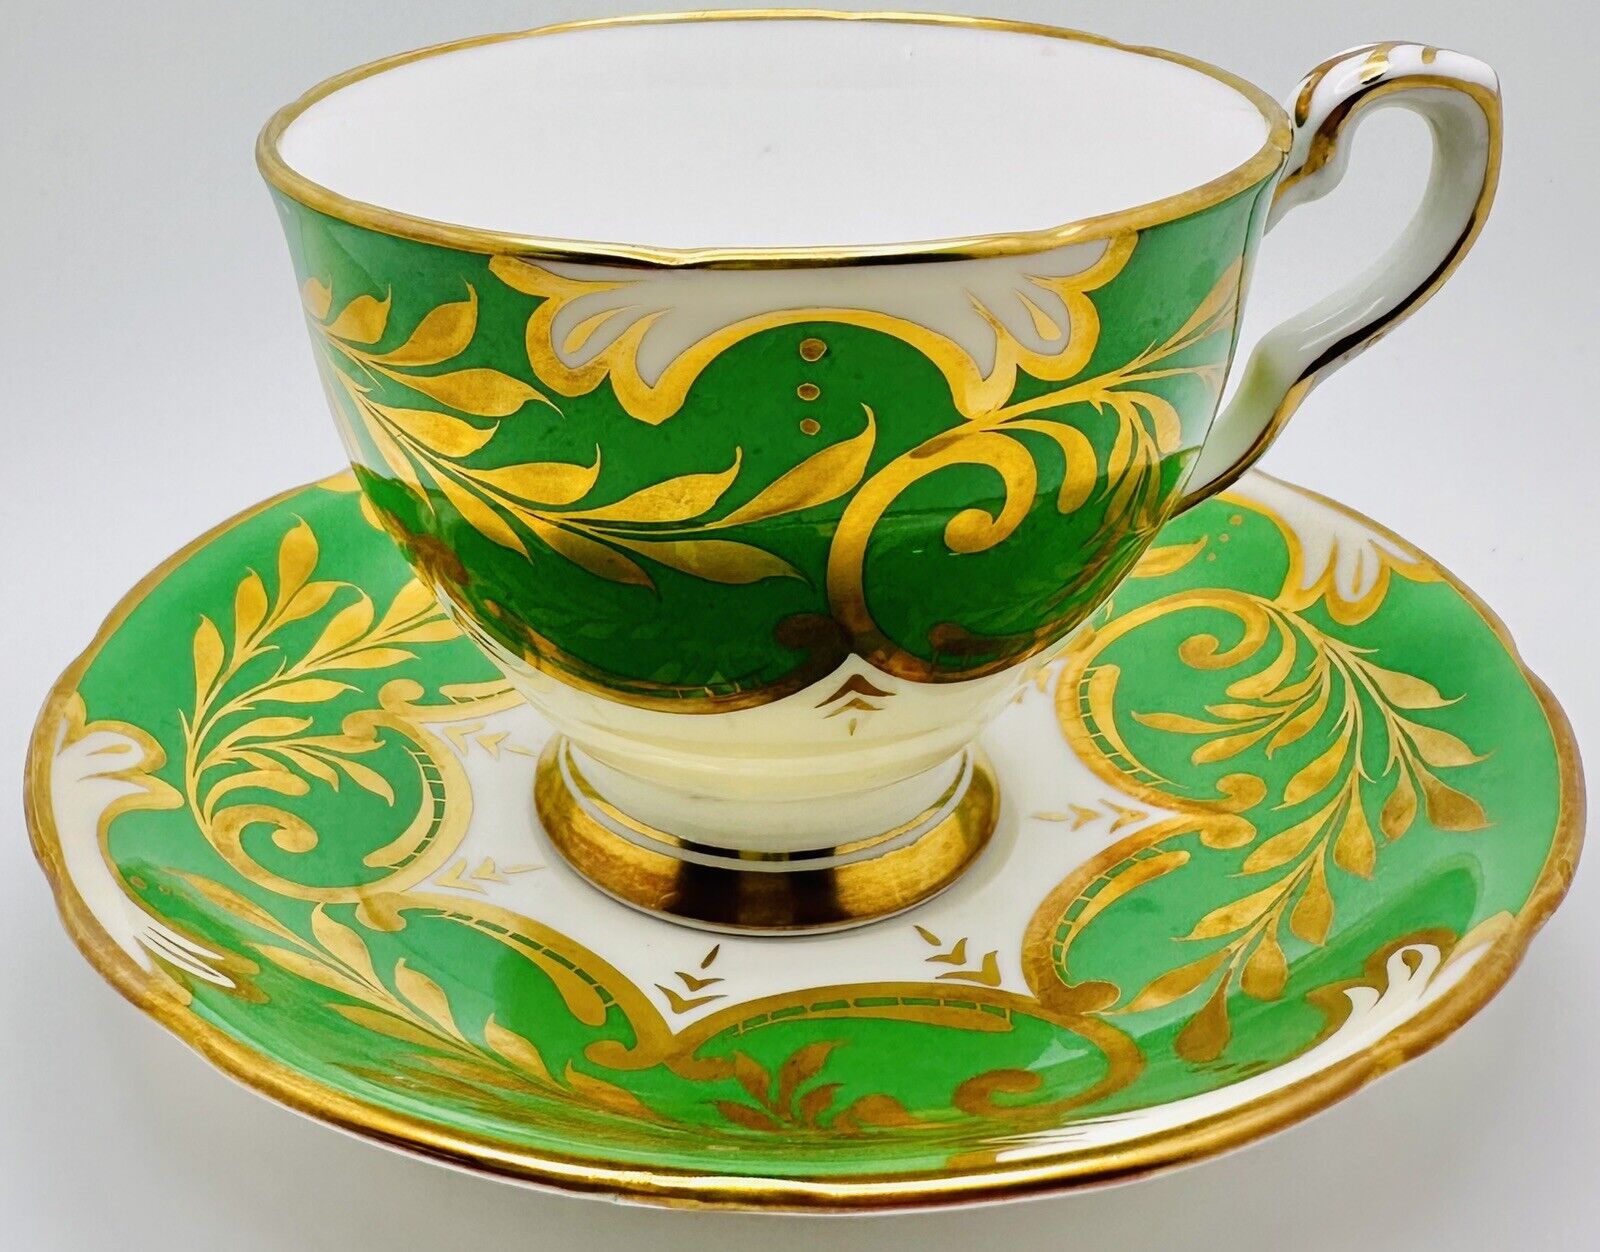 Vintage Royal Stafford England Cup & Saucer Set Green Gold Scroll Accent; Teacup